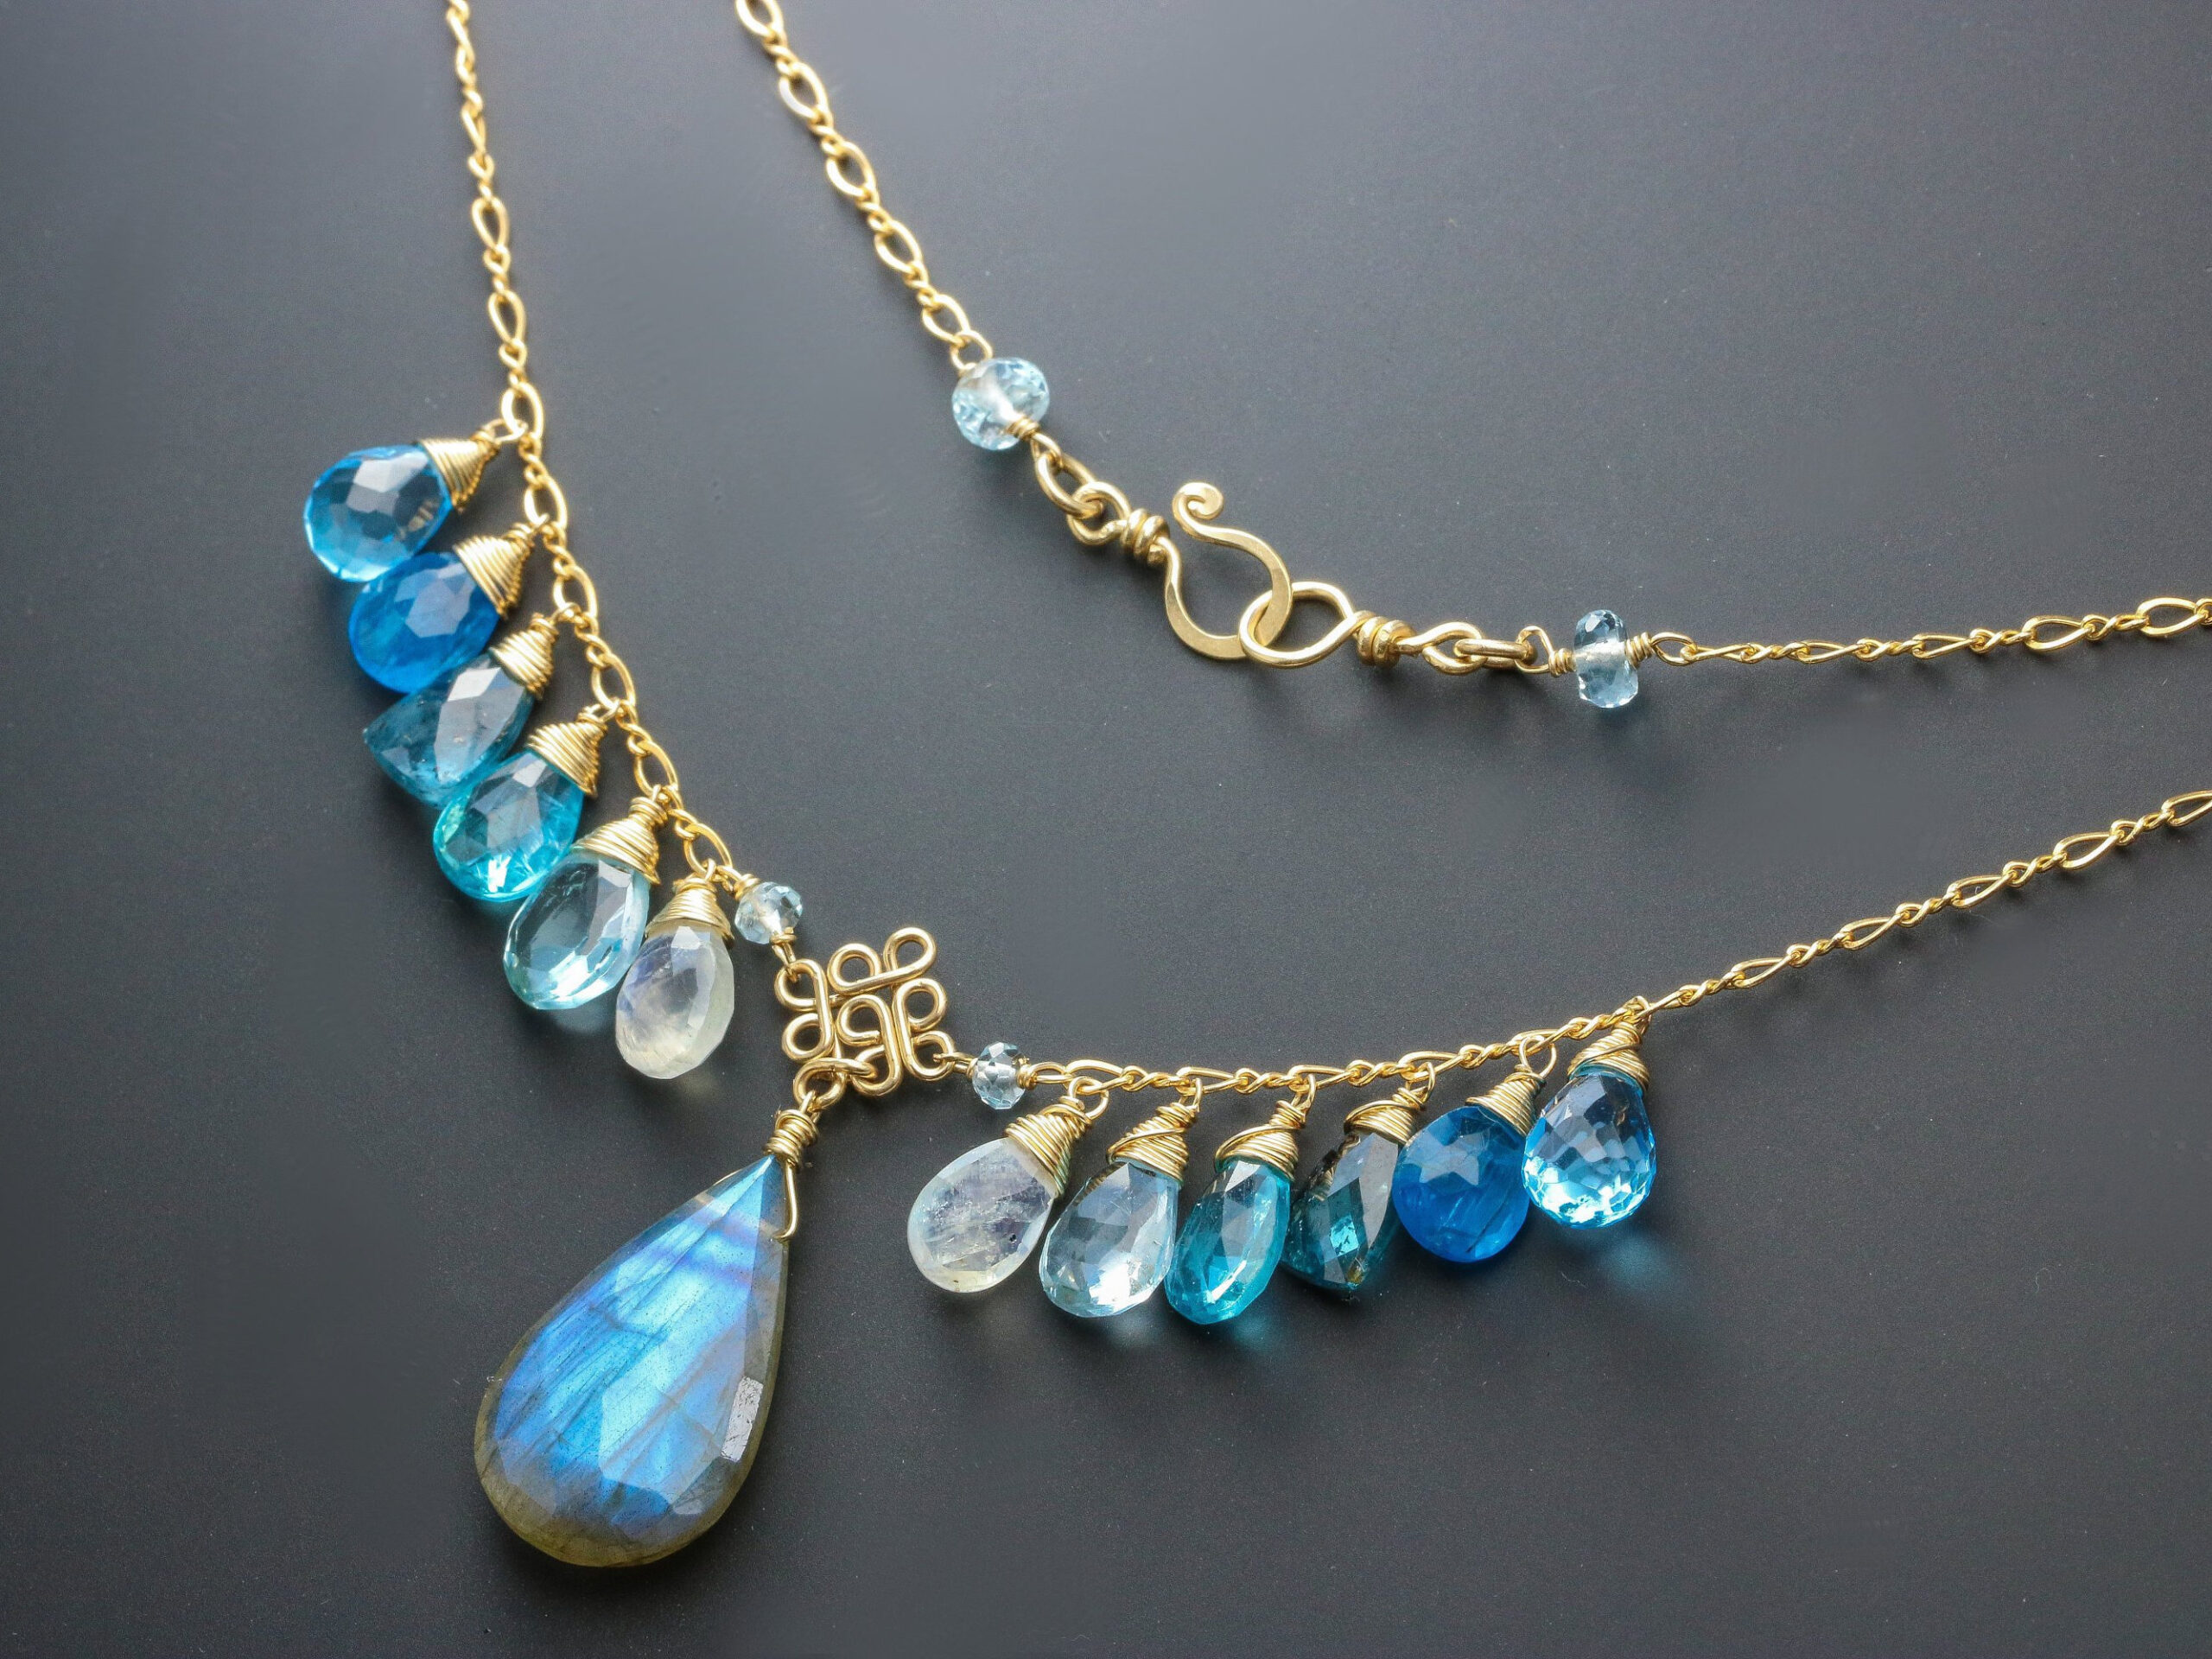 Solid Gold 14K Blue Labradorite with Apatite, Topaz and Moss Kyanite Necklace, Multi Gemstone Statement Necklace